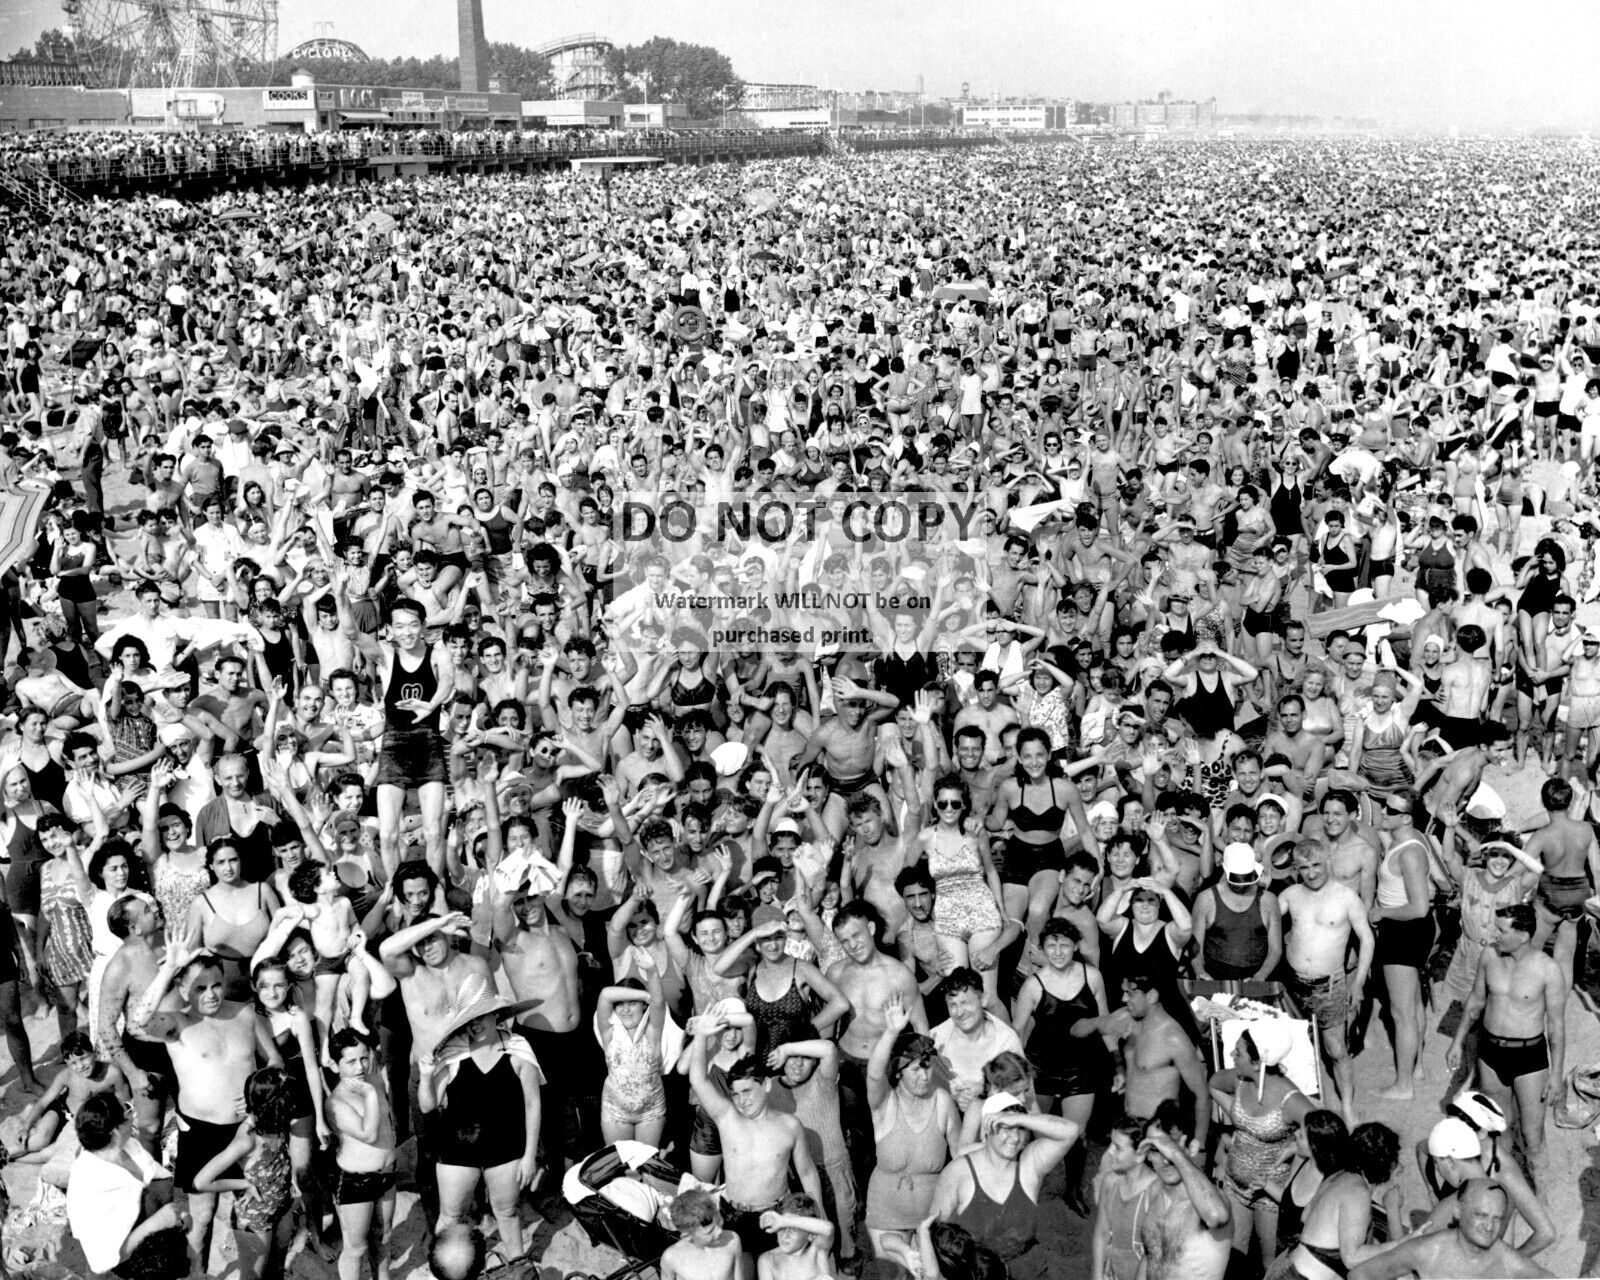 LARGE CROWD AT CONEY ISLAND BEACH IN JULY, 1940 - 8X10 PHOTO (BT900)